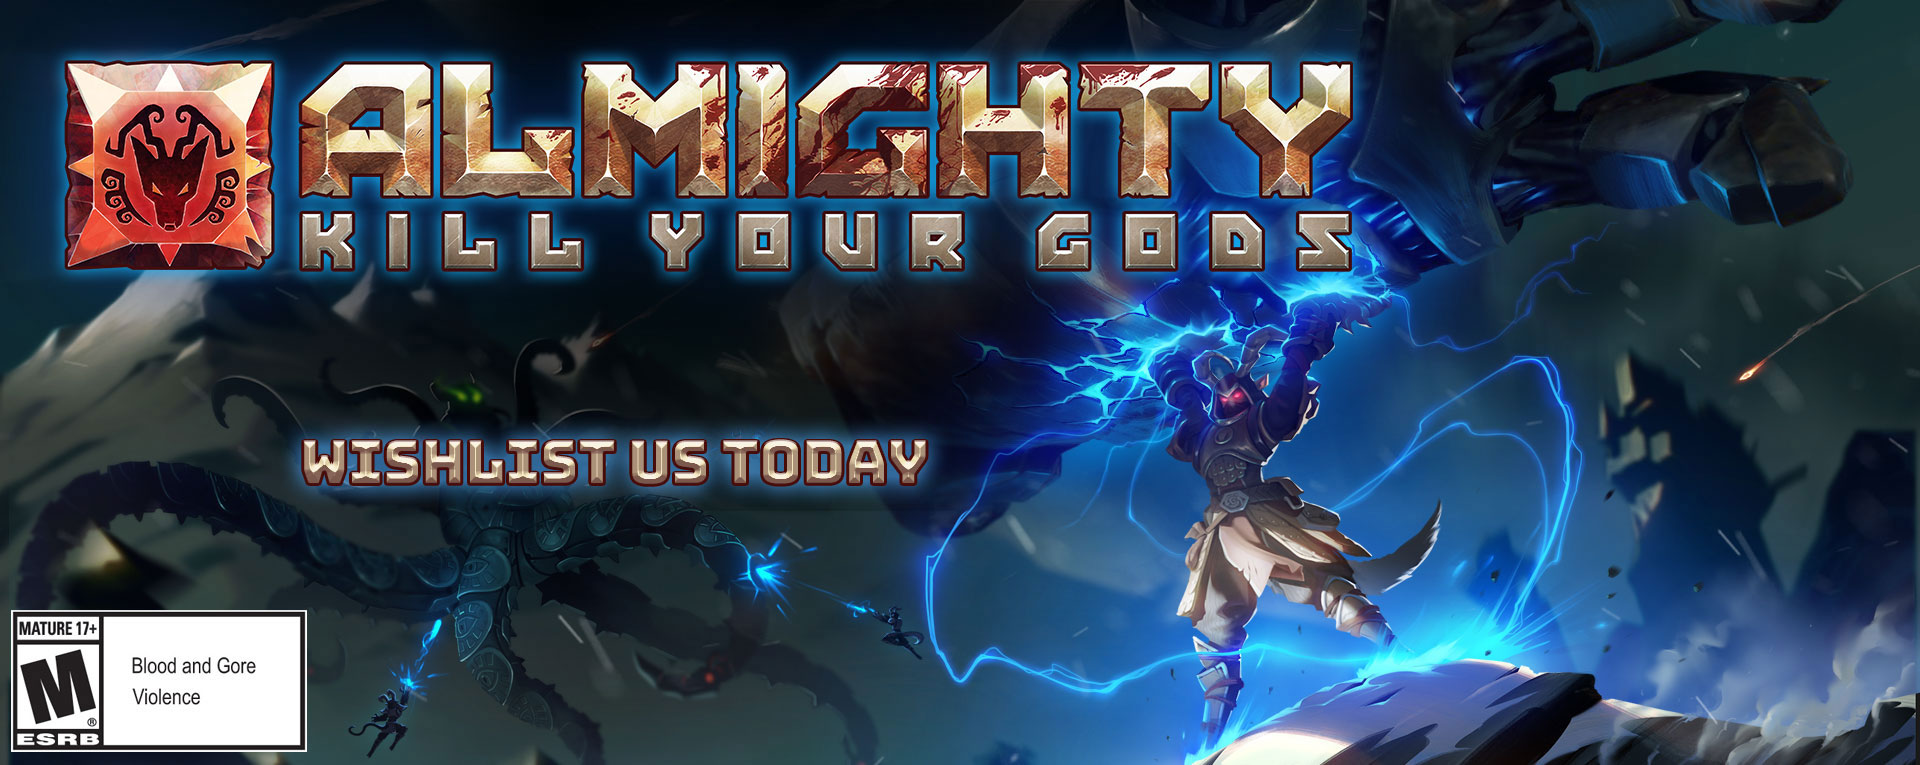 Almighty: Kill Your Gods Announcement